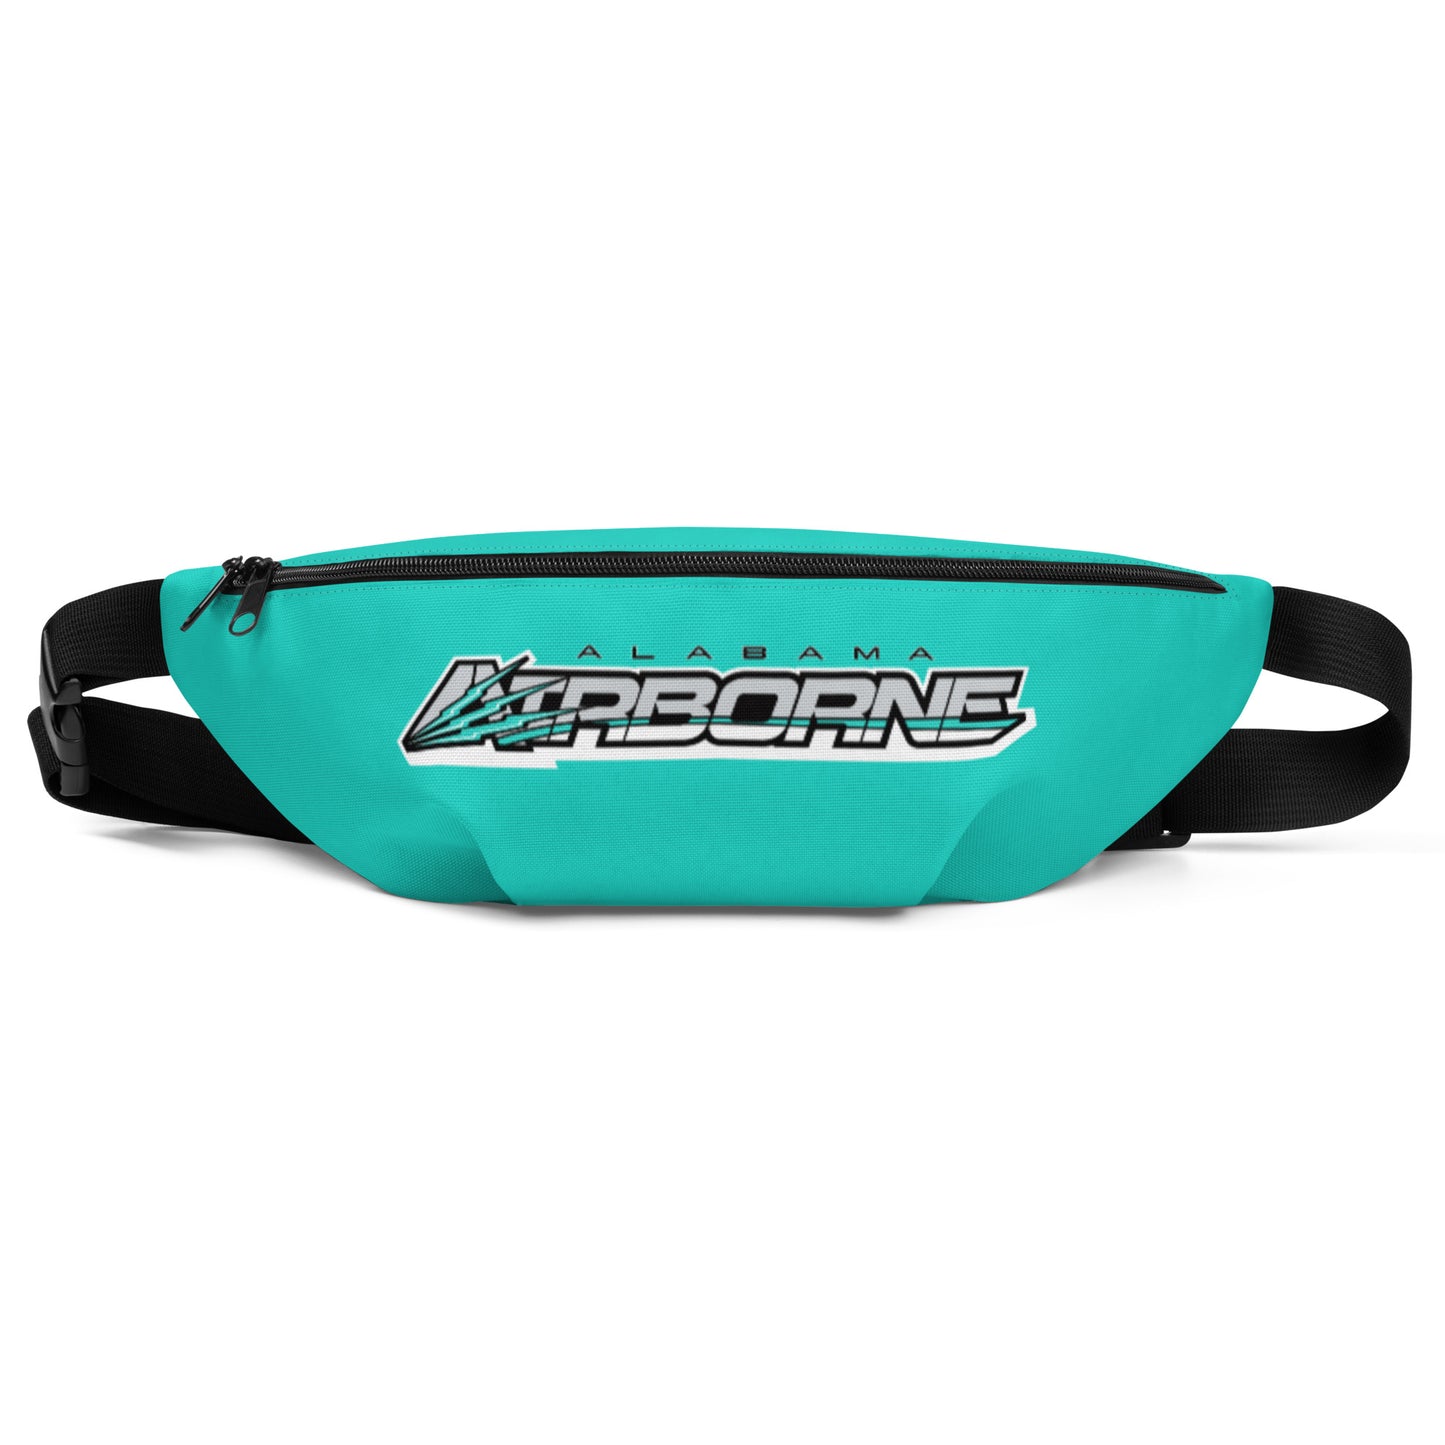 Airborne Fanny Pack